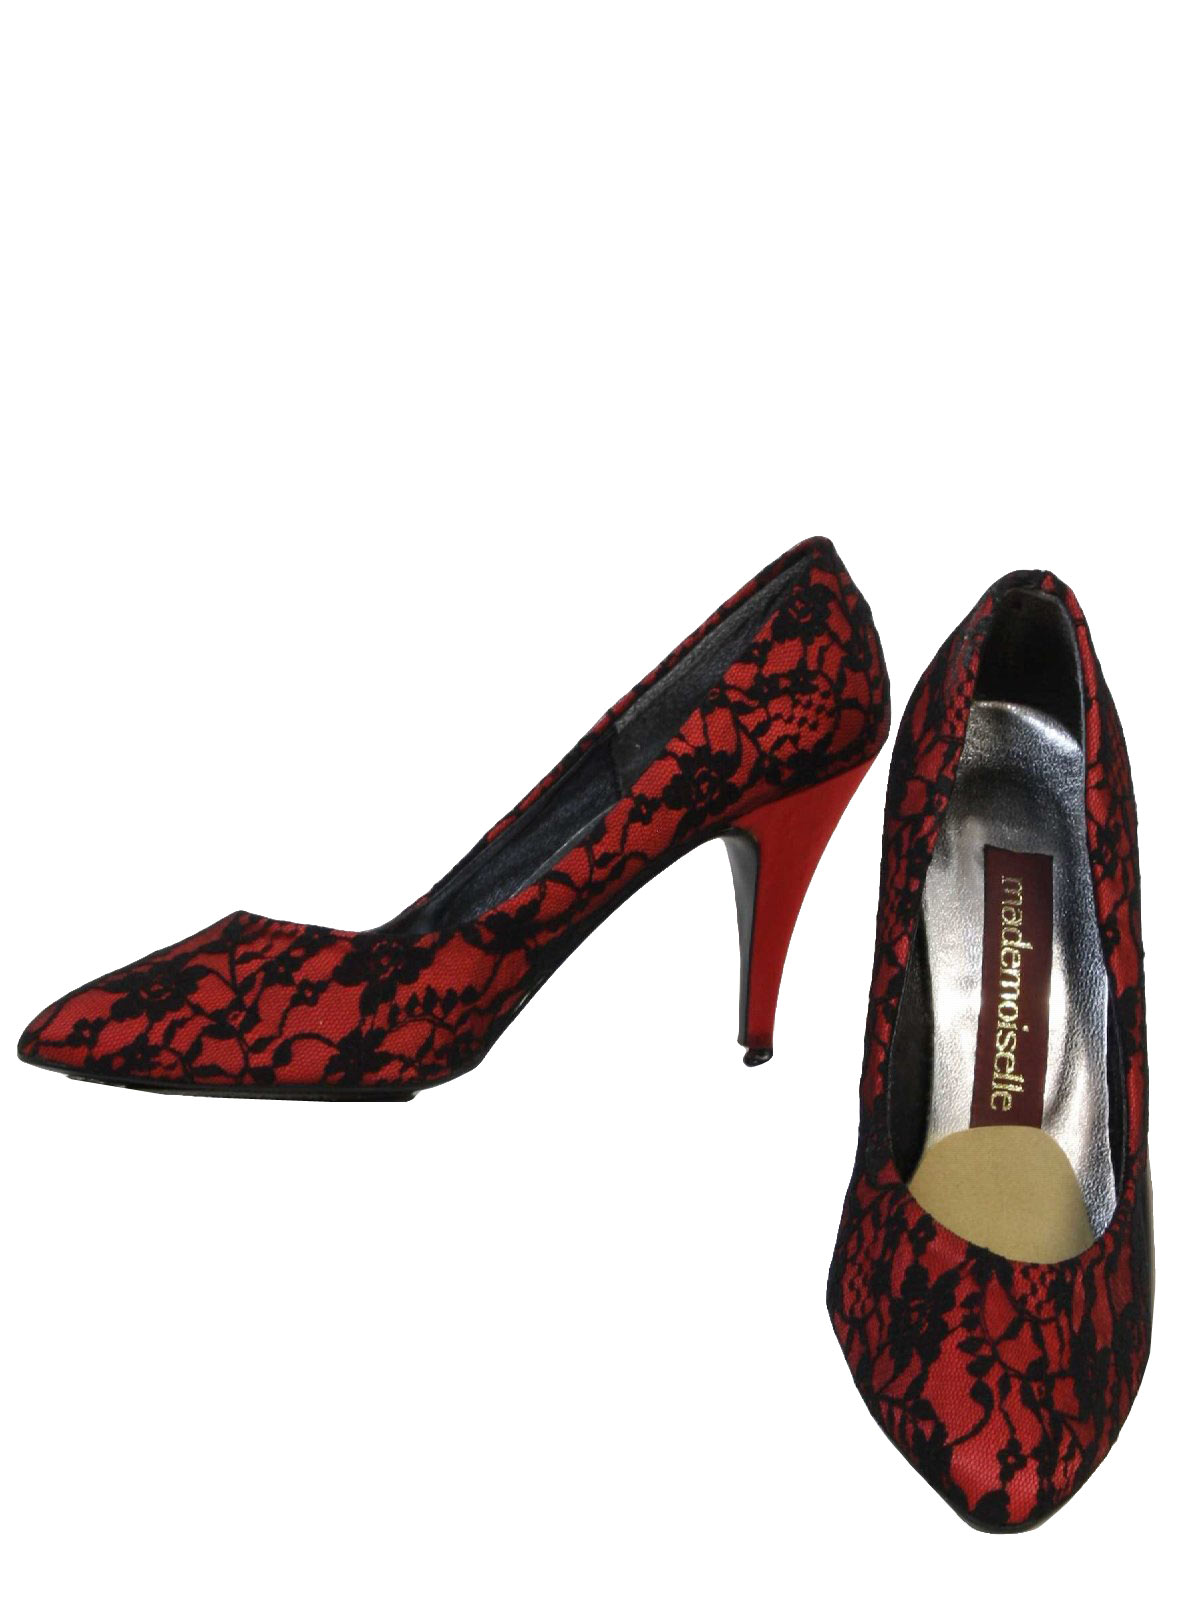 black and red shoes heels